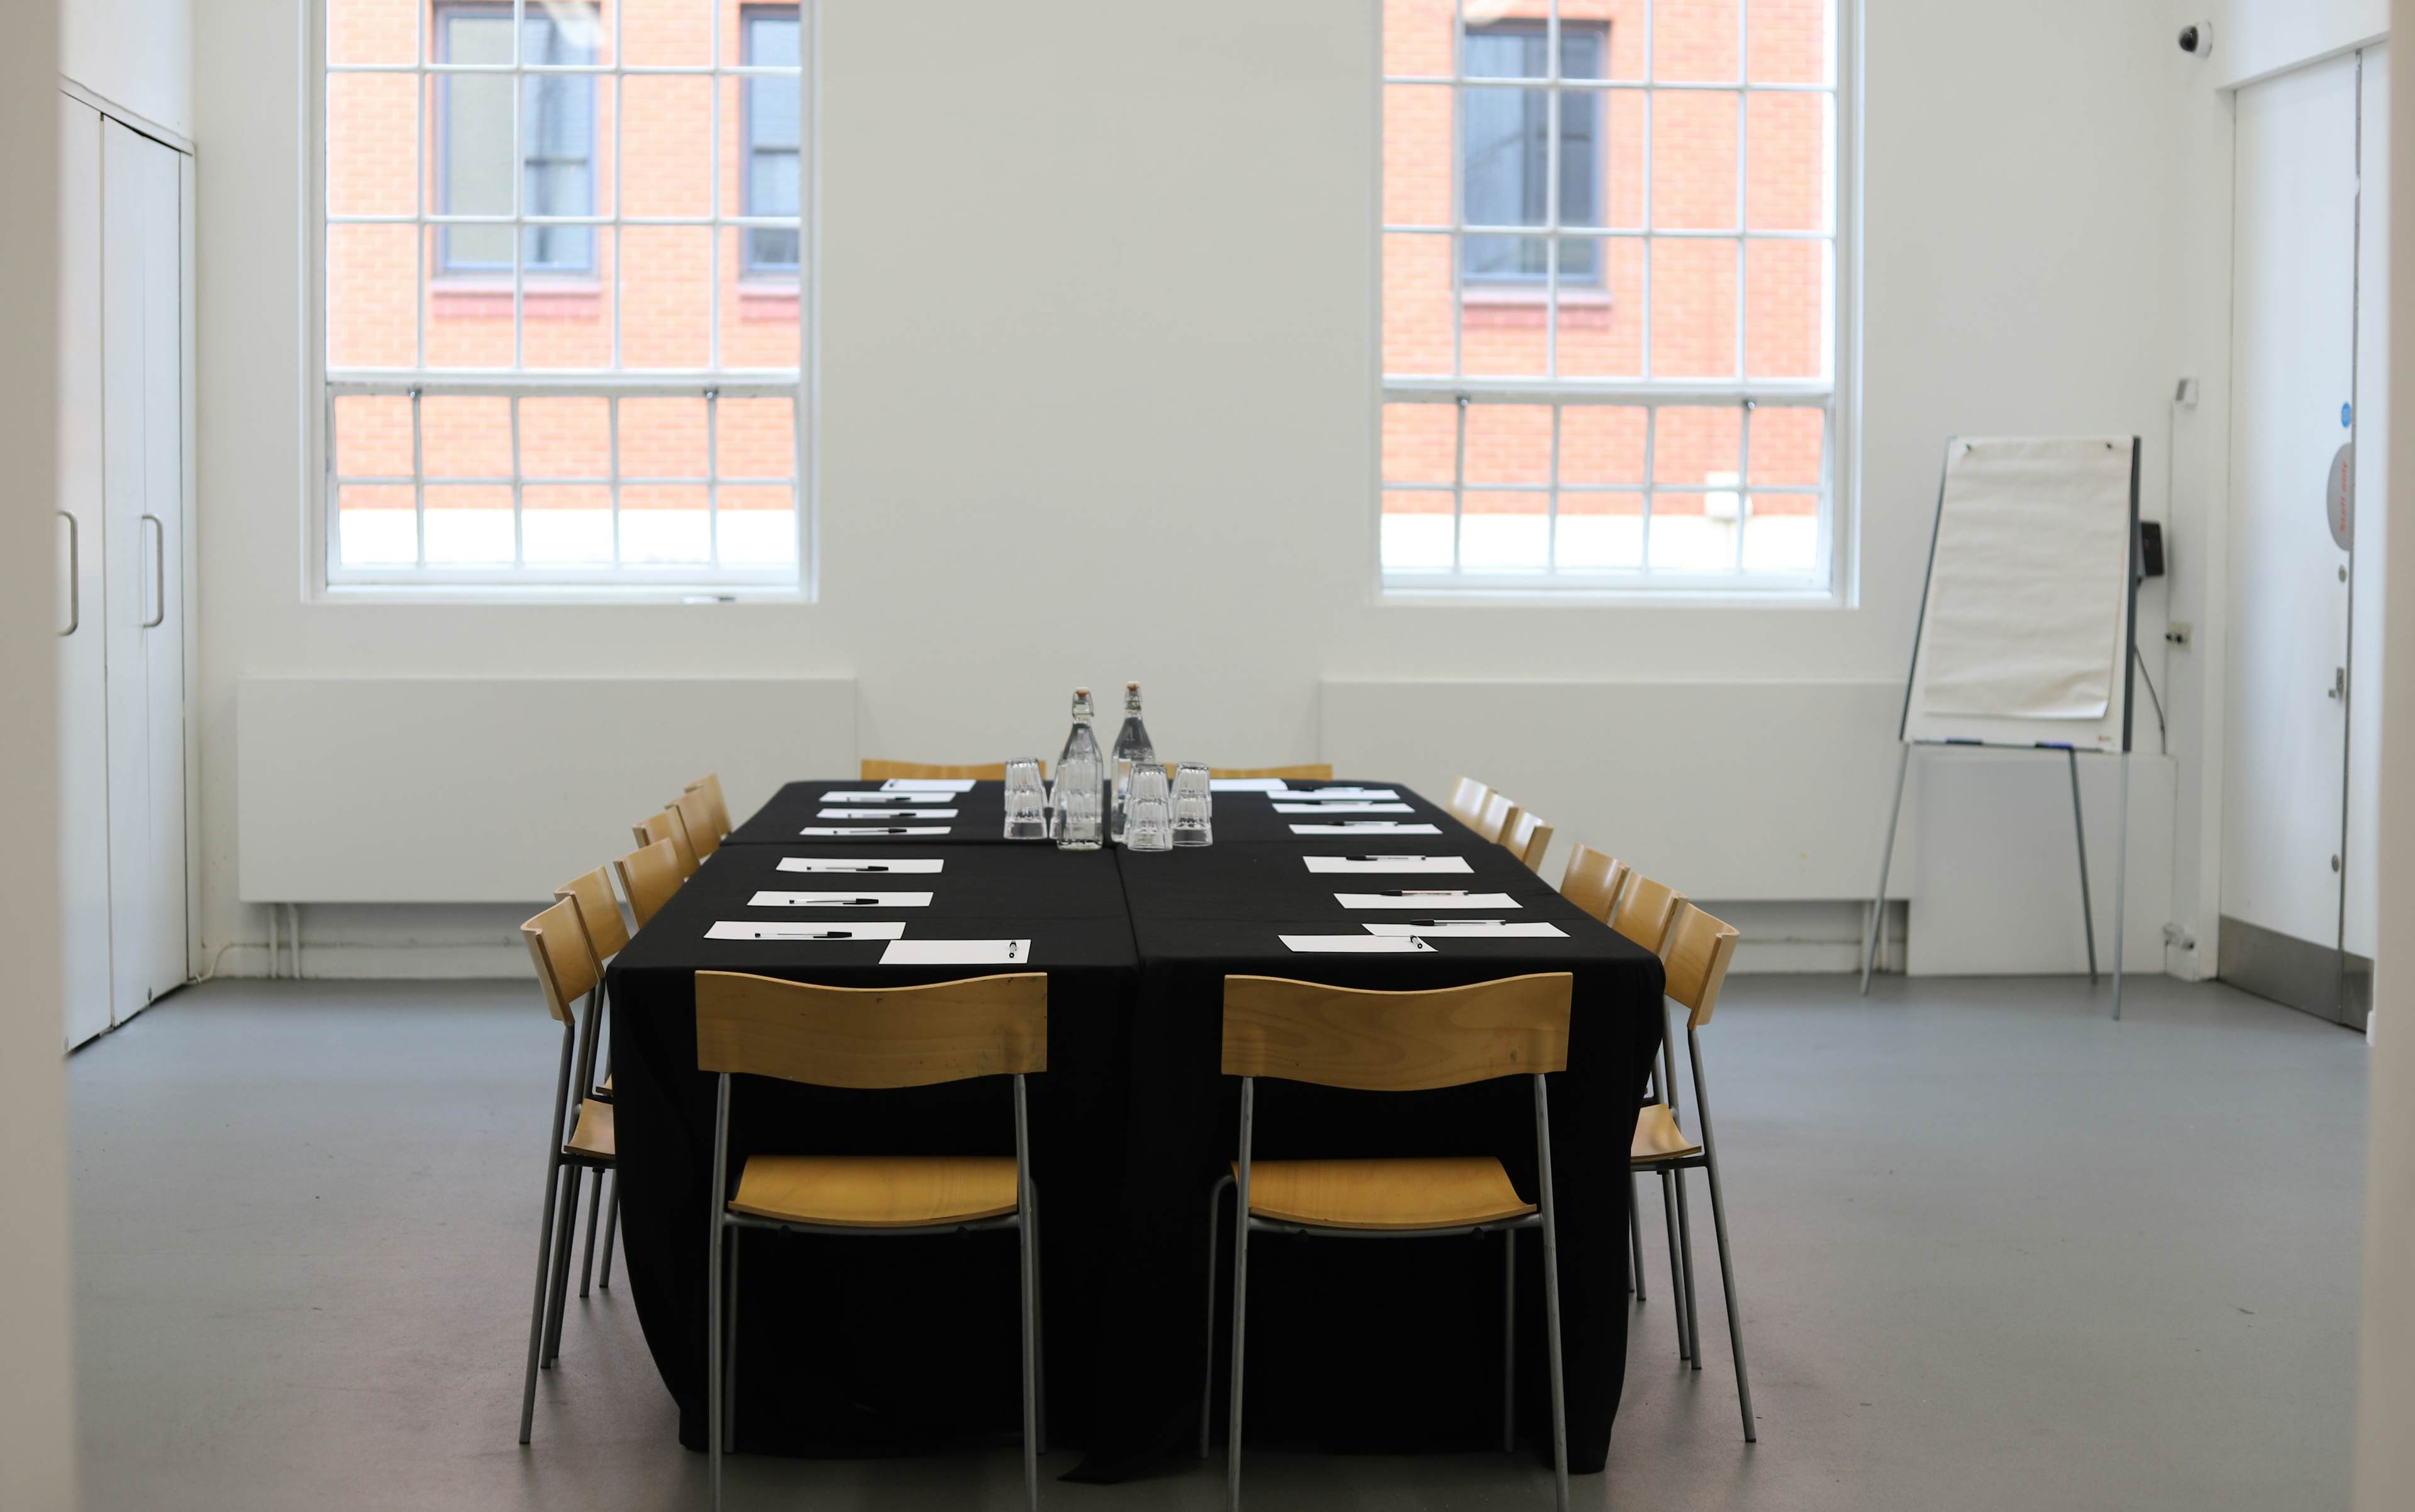 Ikon Gallery - Events Room image 1